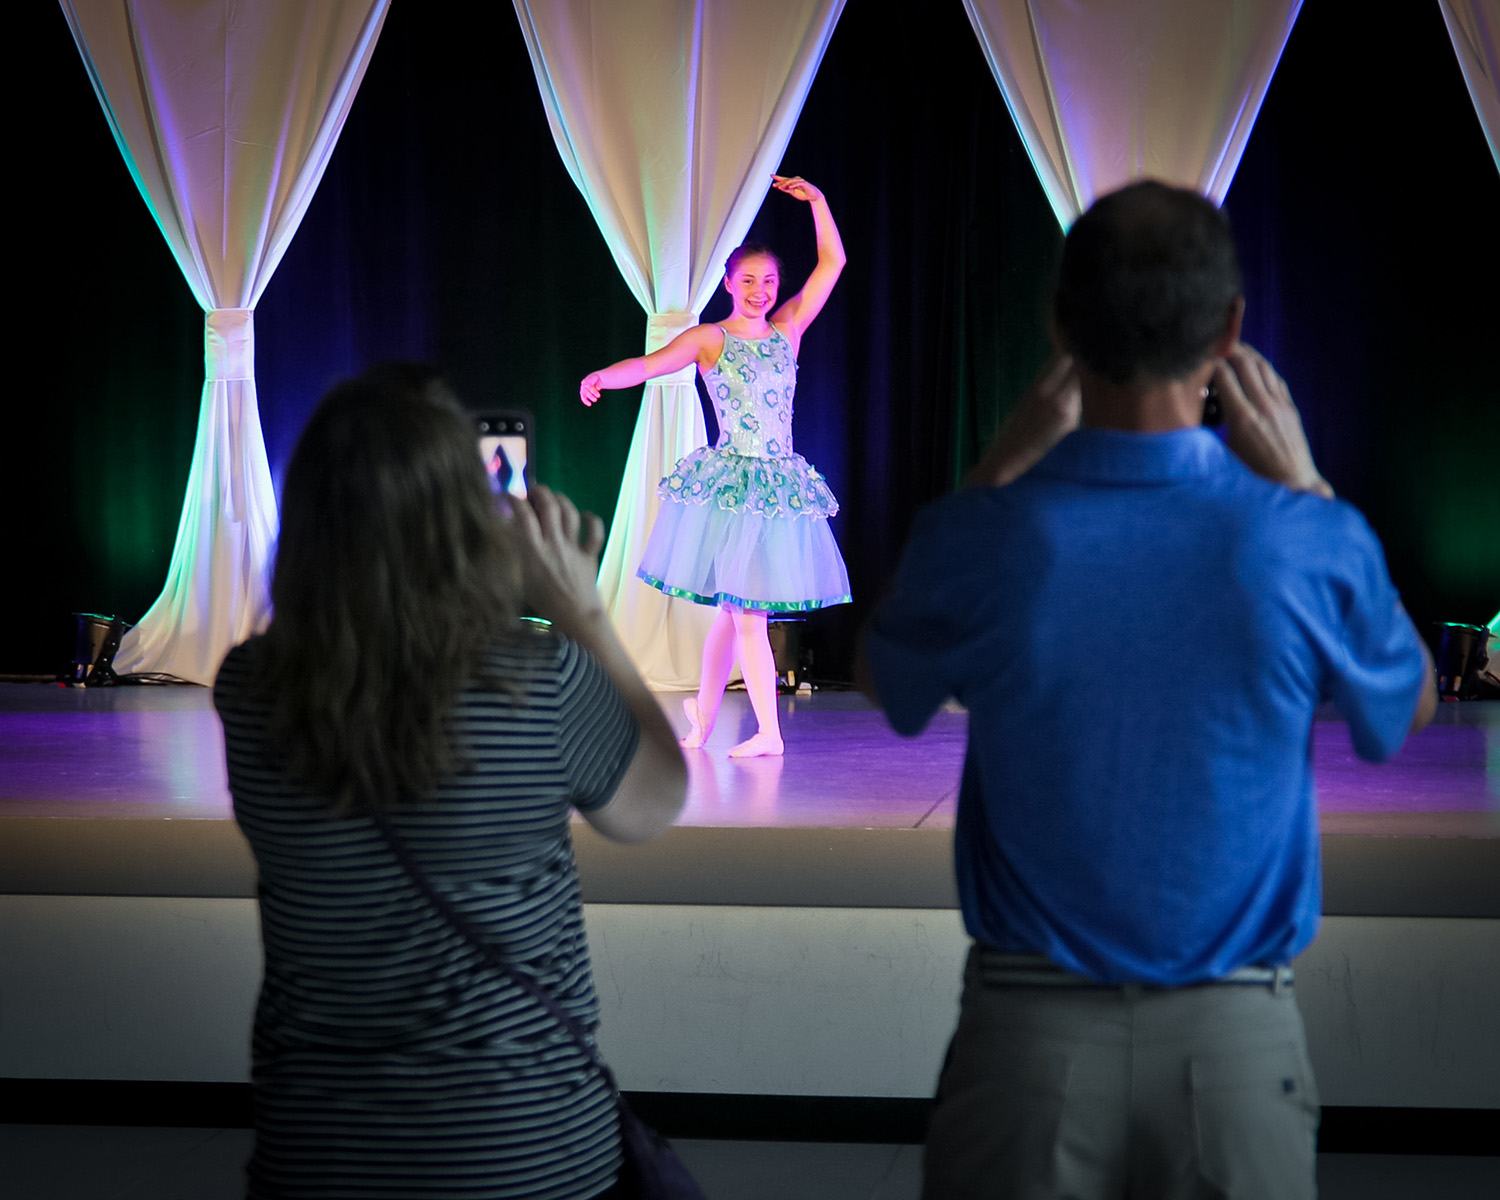 A middle school aged dancer performs a solo in a blue ballet costume with a long tutu. Two adults stand in front of the stage, taking photos or videos of her.